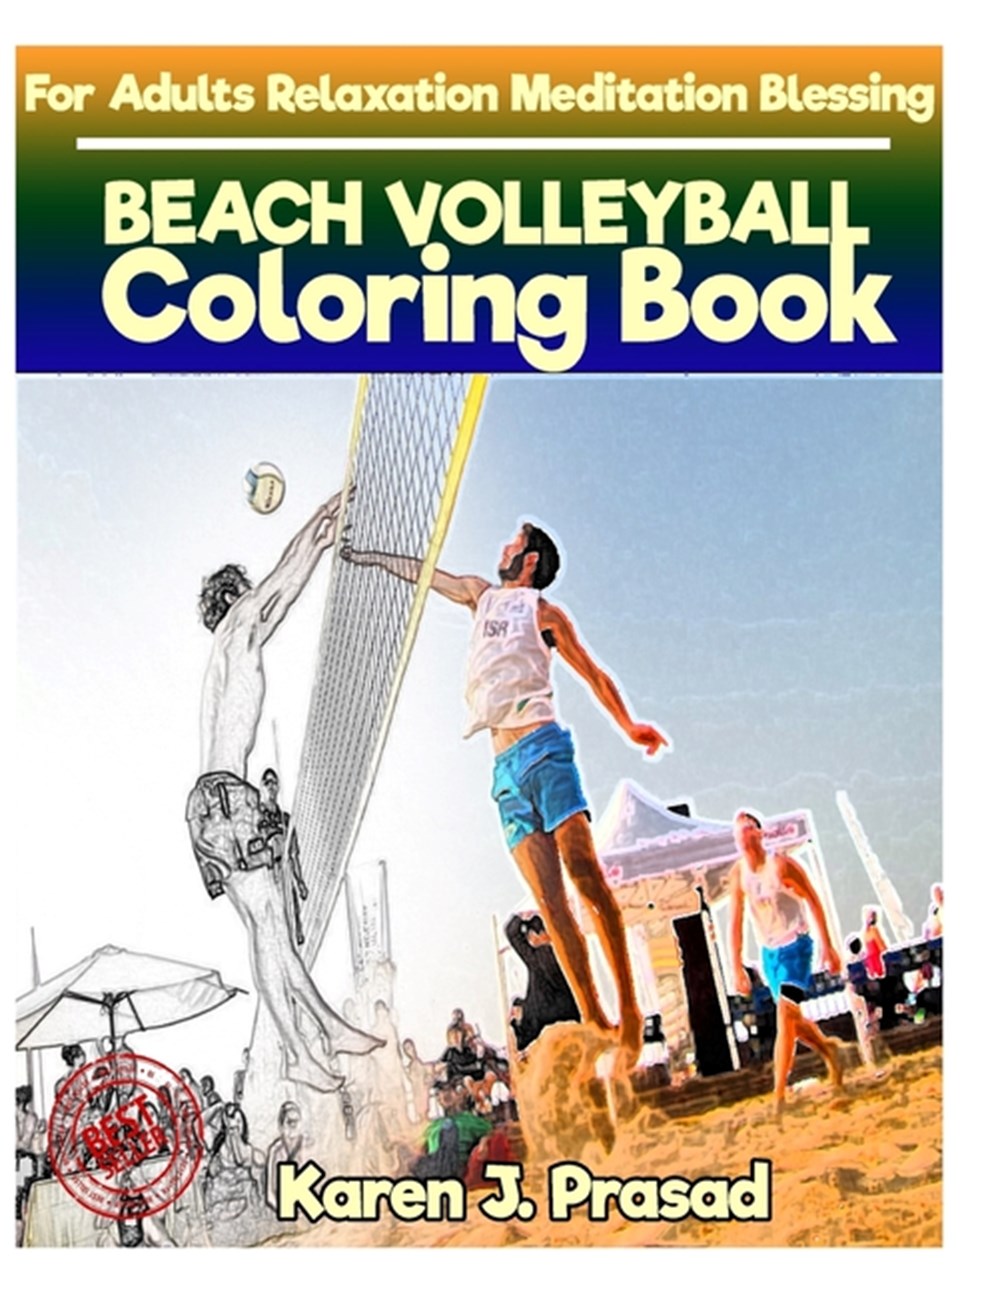 BEACH VOLLEYBALL Coloring book for Adults Relaxation Meditation Blessing Sketch coloringbook Graysca